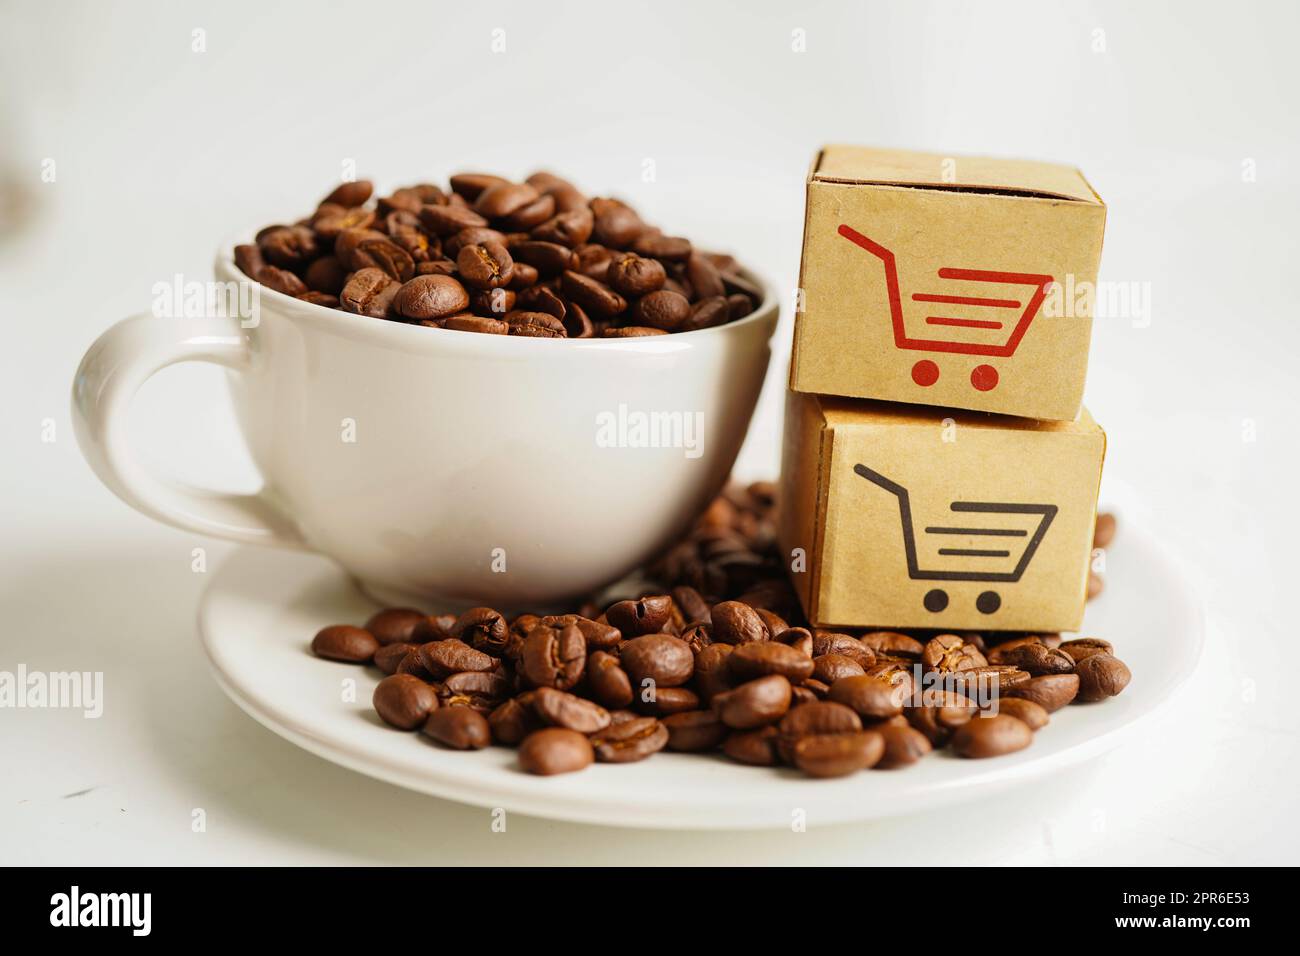 Shopping cart box on coffee beans, shopping online for export or import. Stock Photo